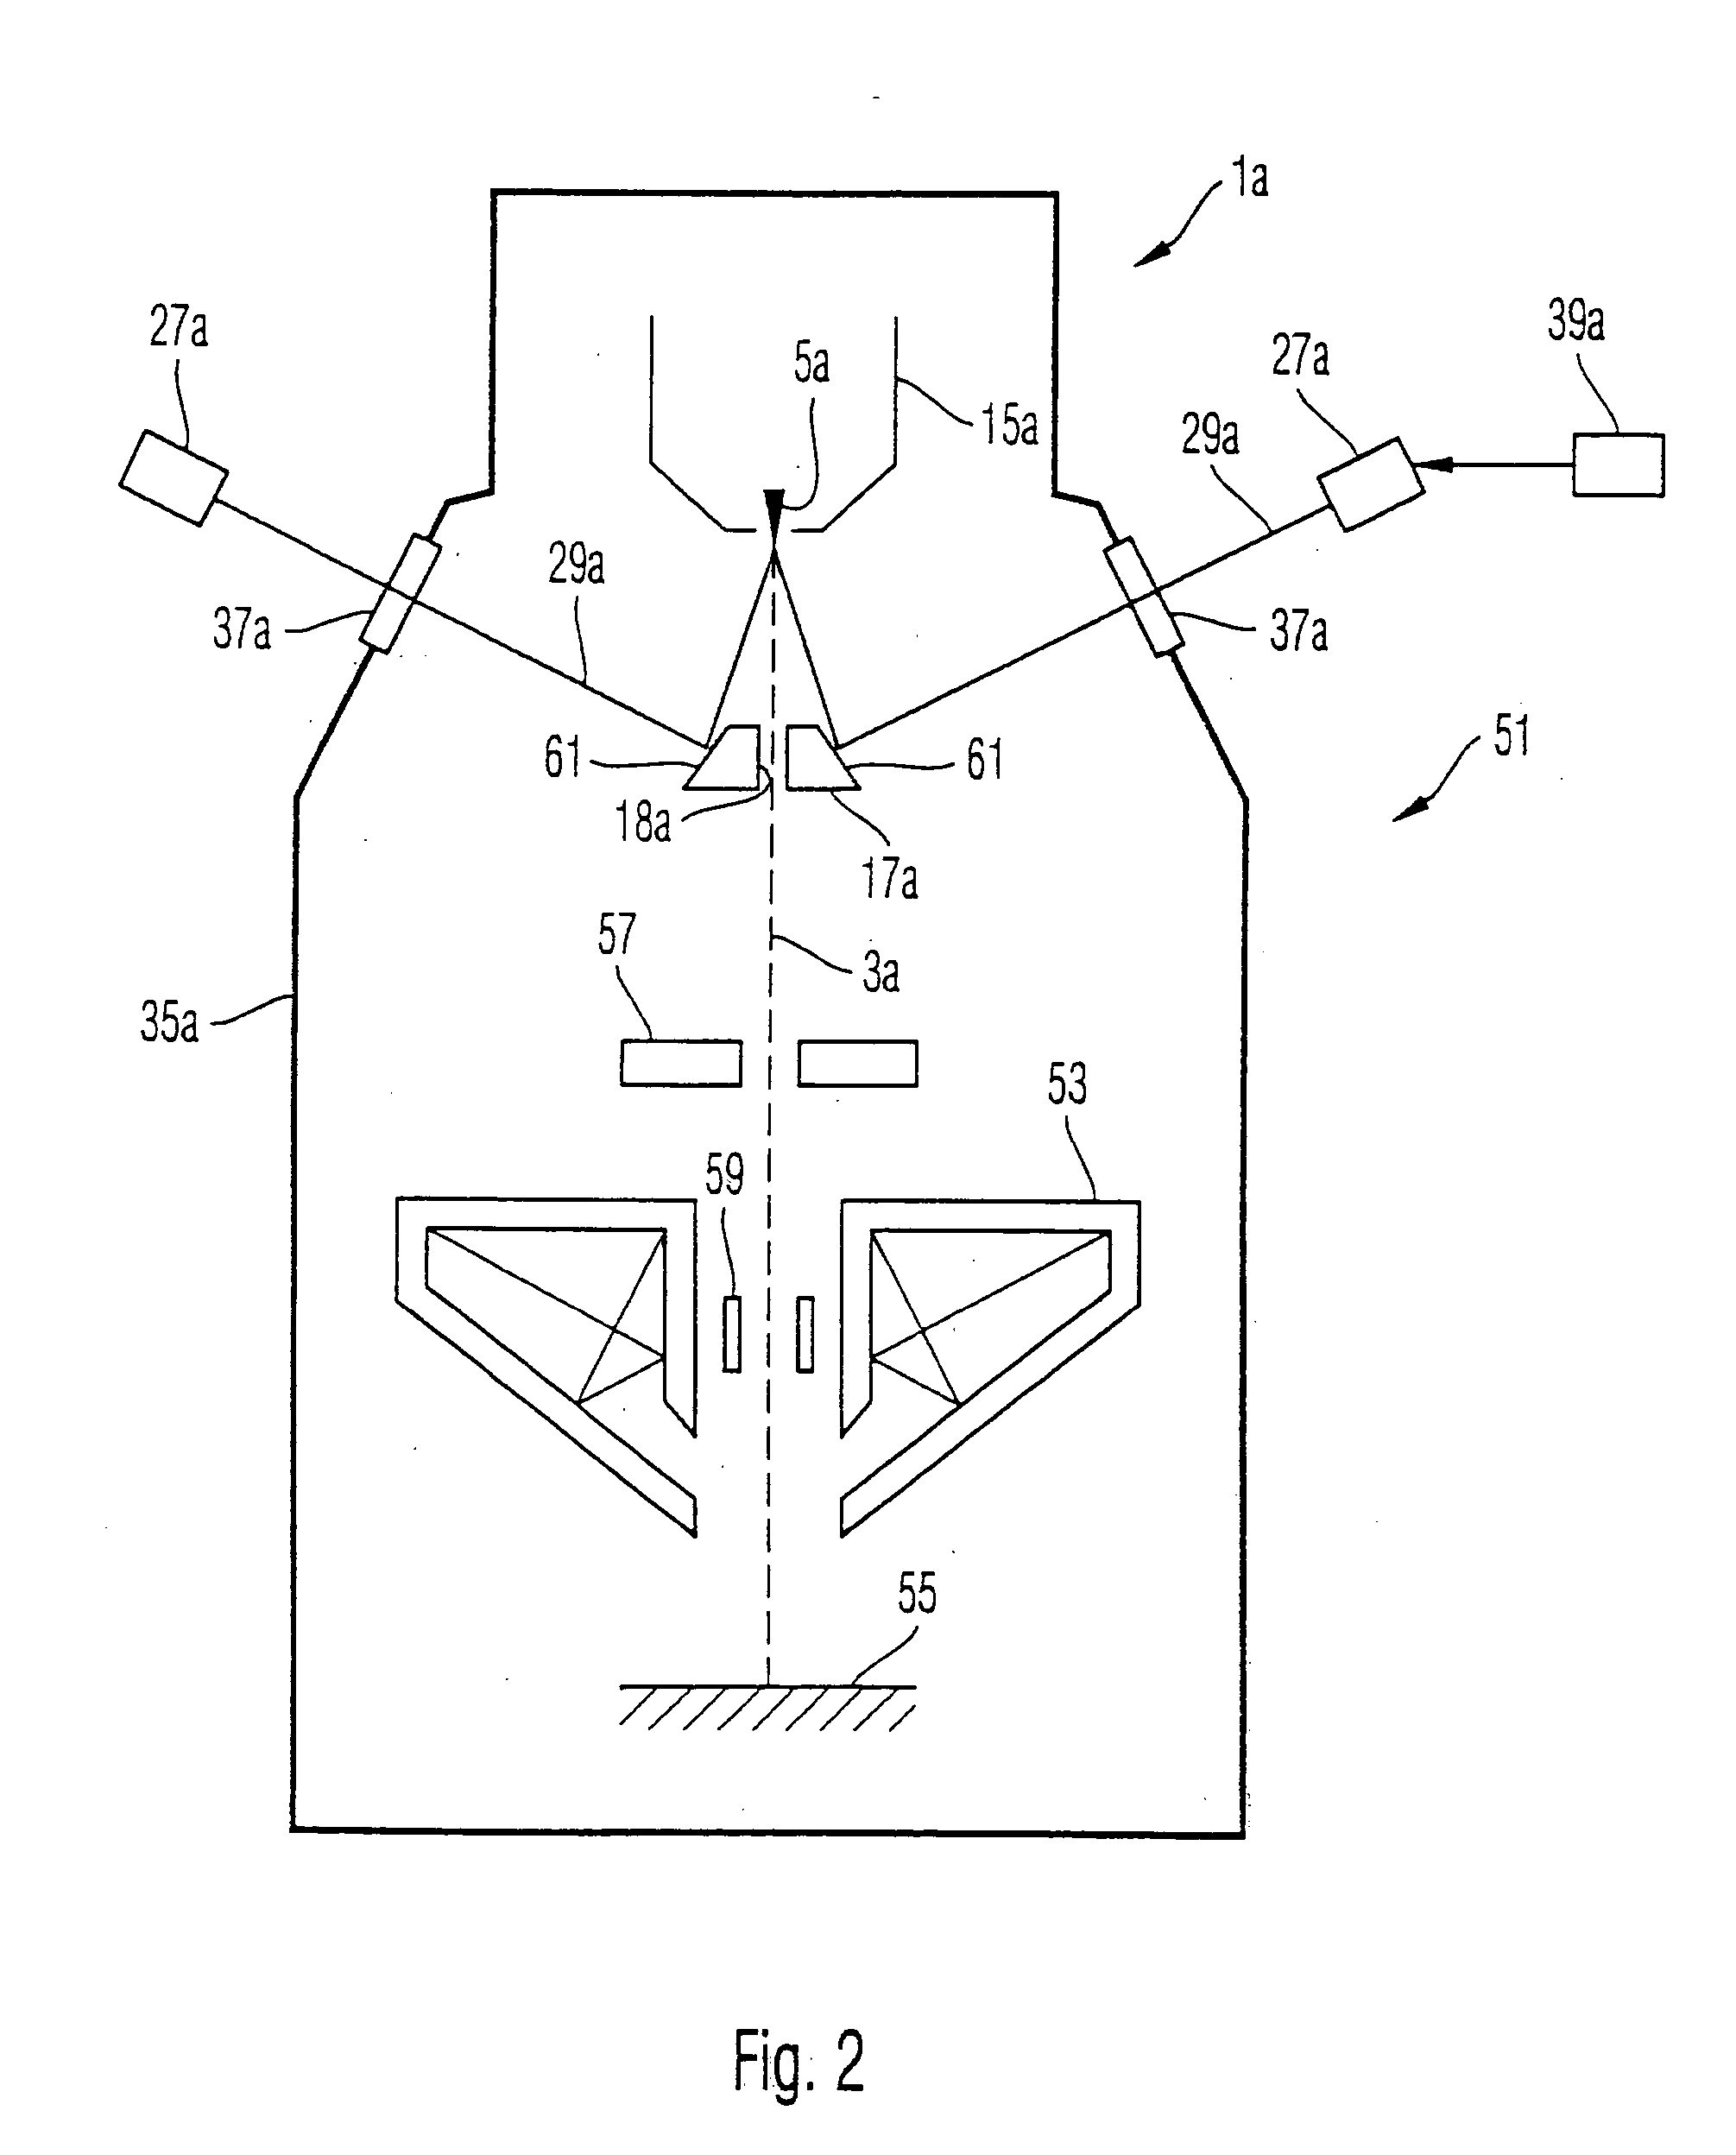 Electron beam source, electron optical apparatus using such beam source and method of operating an electron beam source